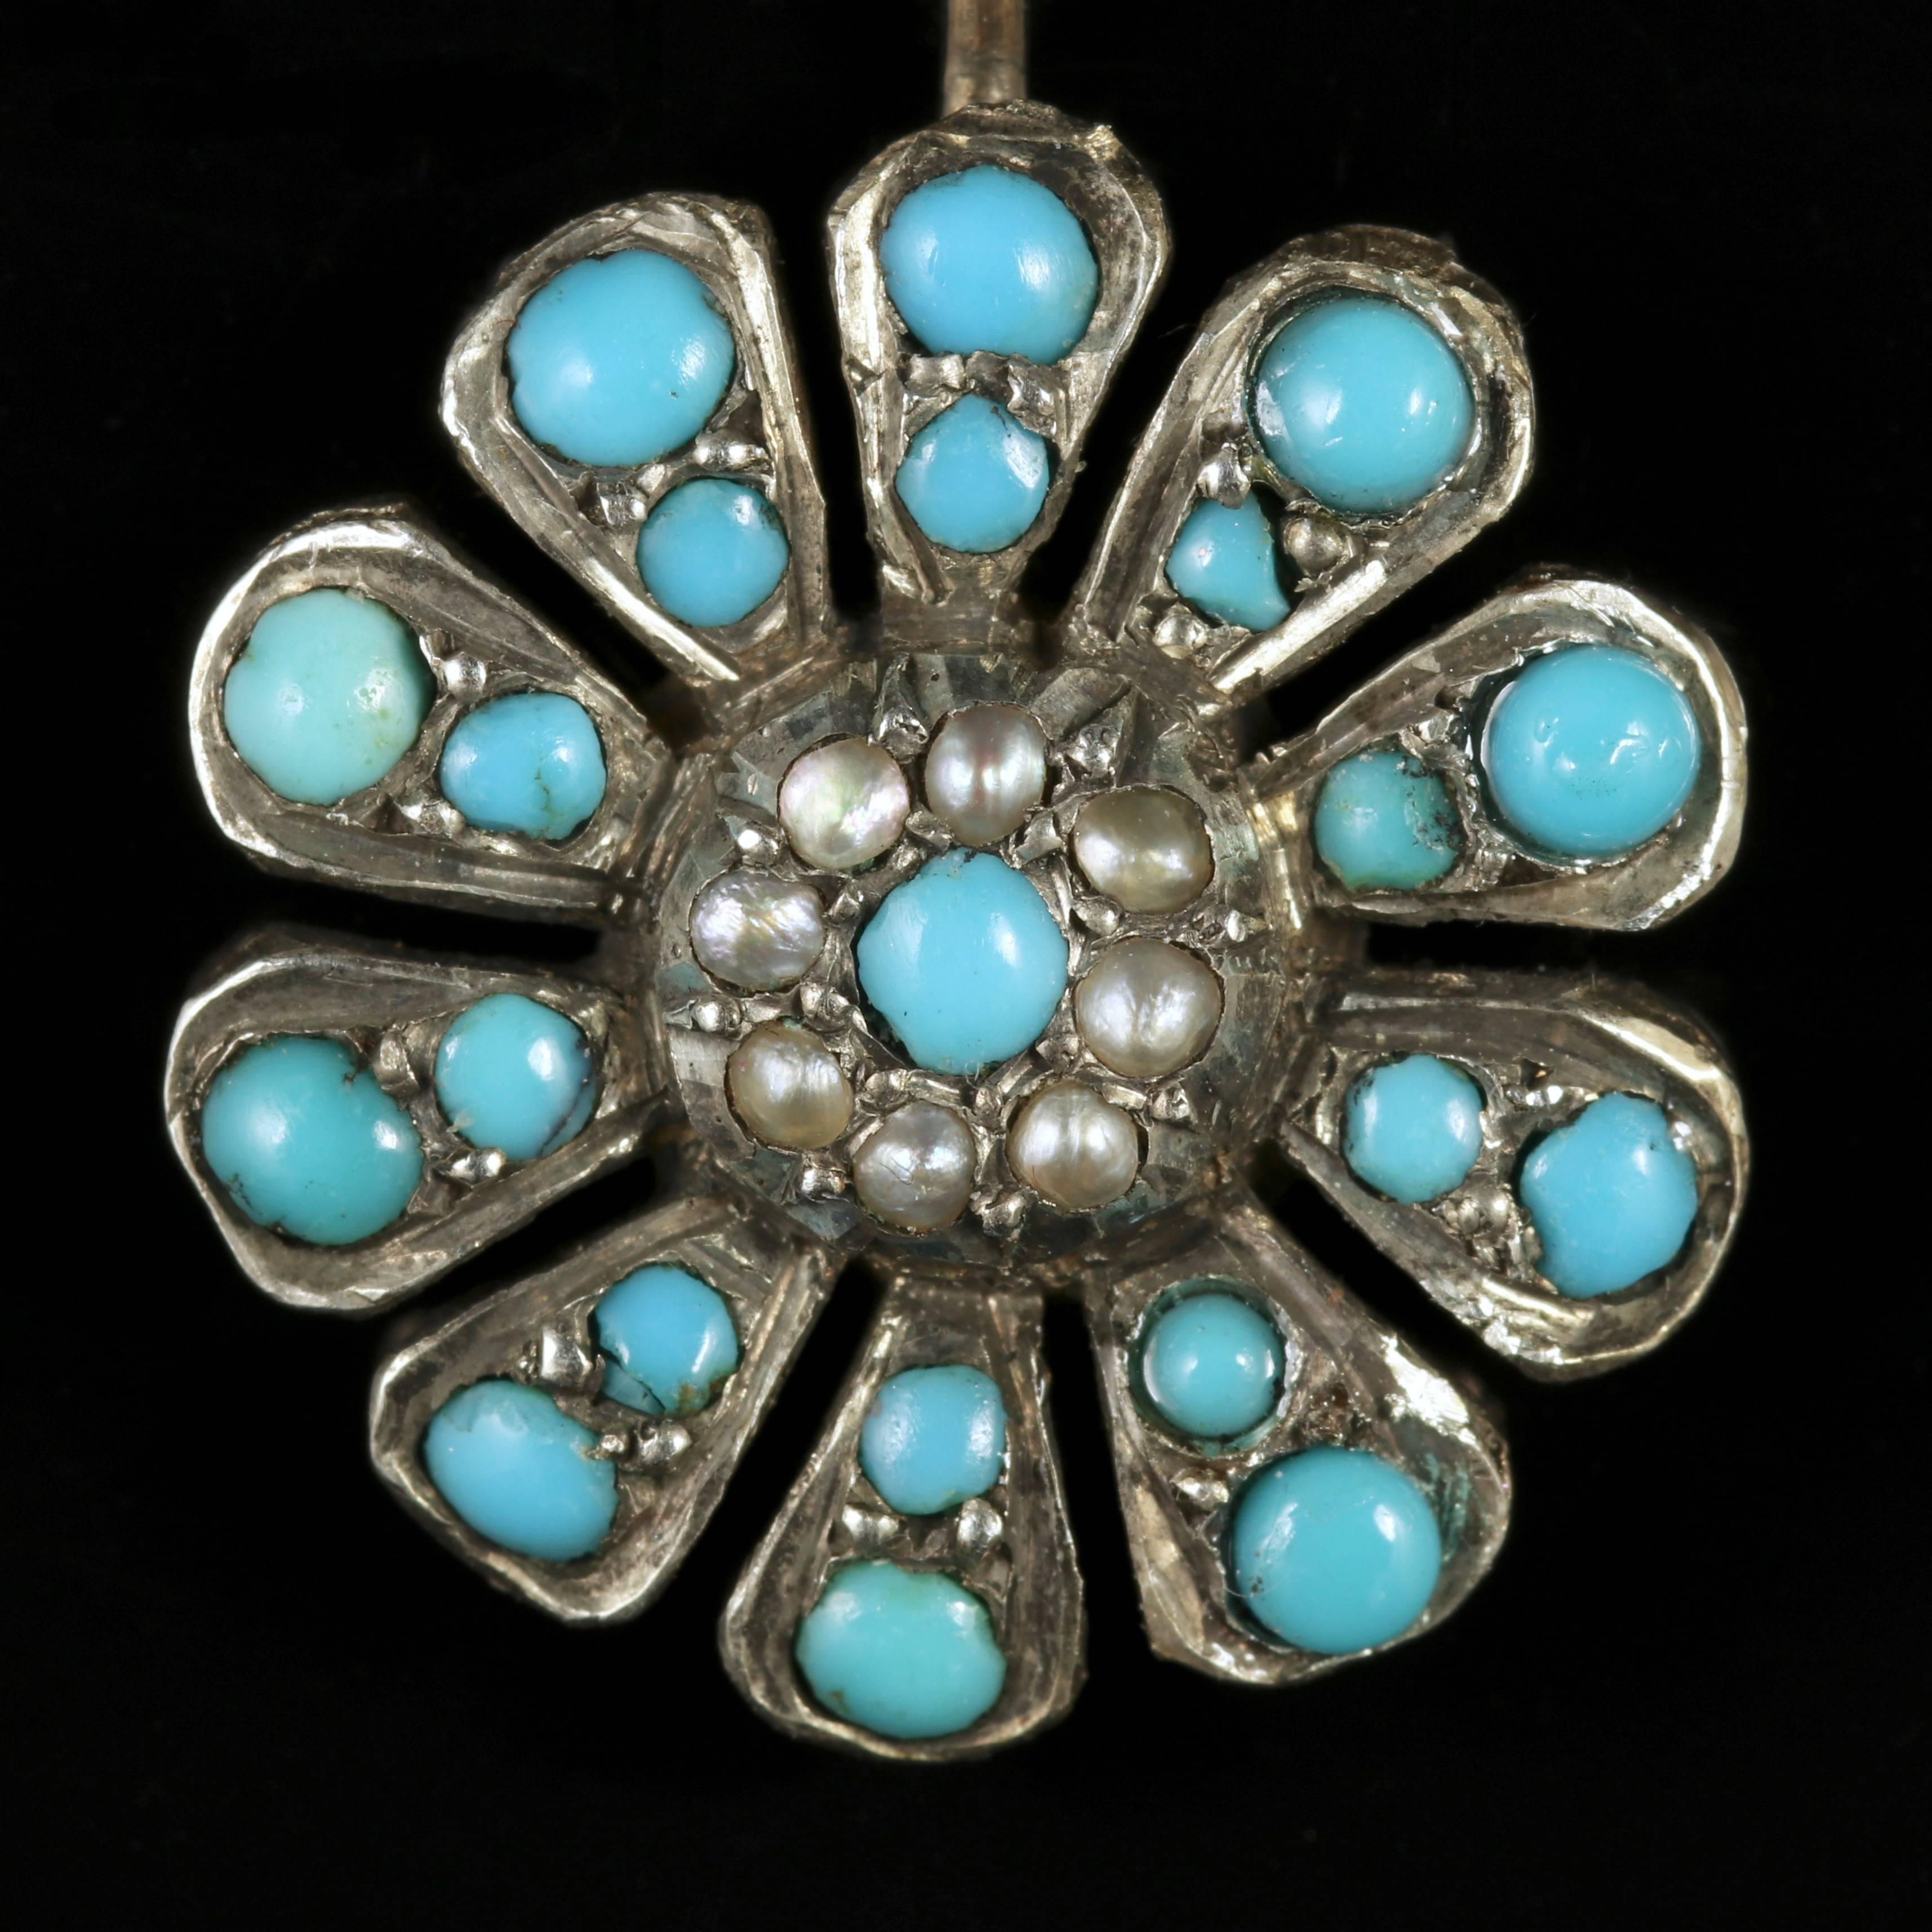 To read more please click continue reading below-
 
These fabulous 18ct Yellow Gold and Silver flower earrings are genuine Victorian, Circa 1900. 

The beautiful earrings are adorned with rich blue natural Turquoises and a halo of Pearls which chase